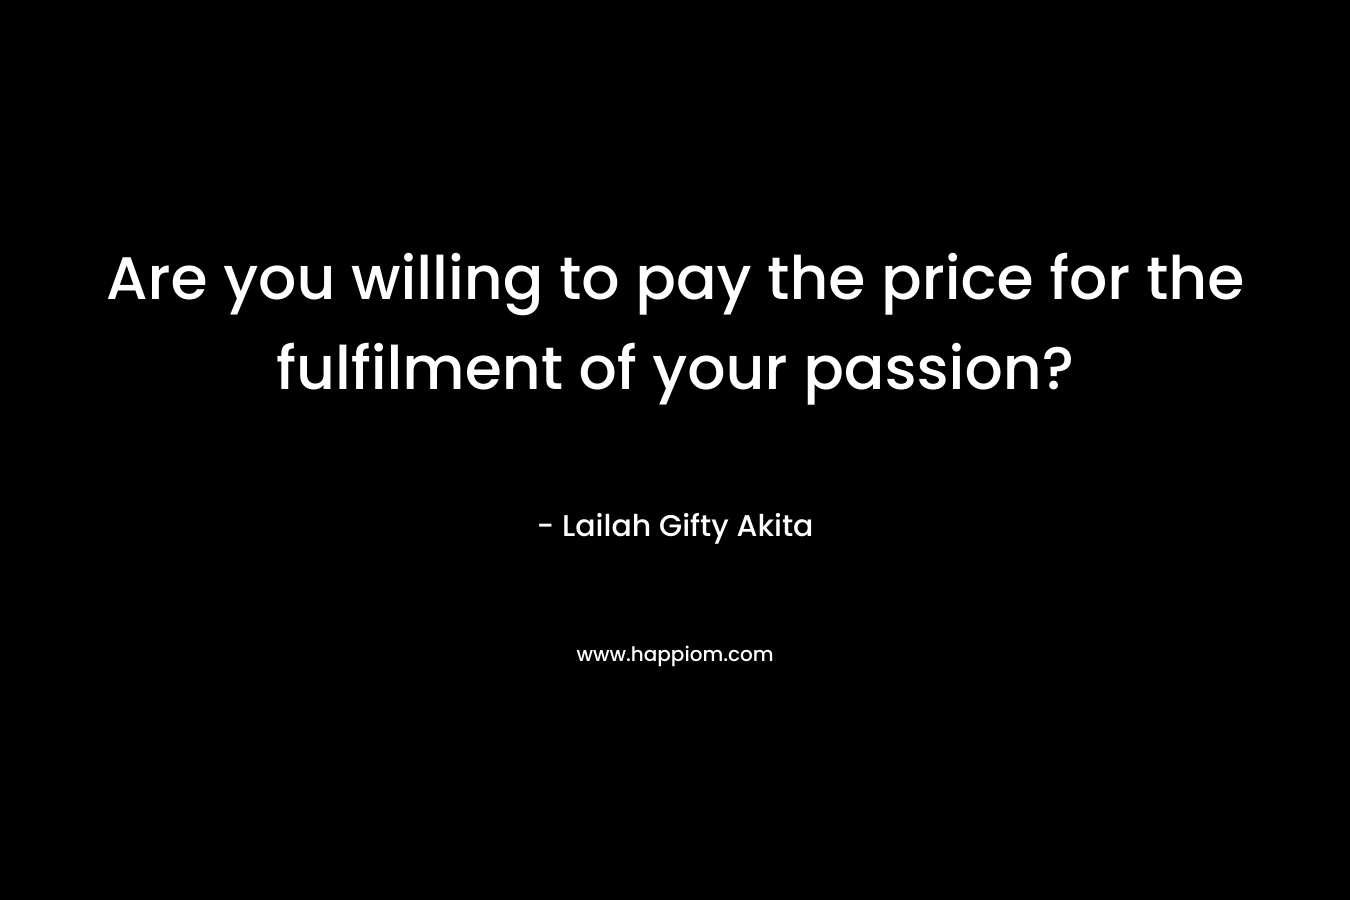 Are you willing to pay the price for the fulfilment of your passion?